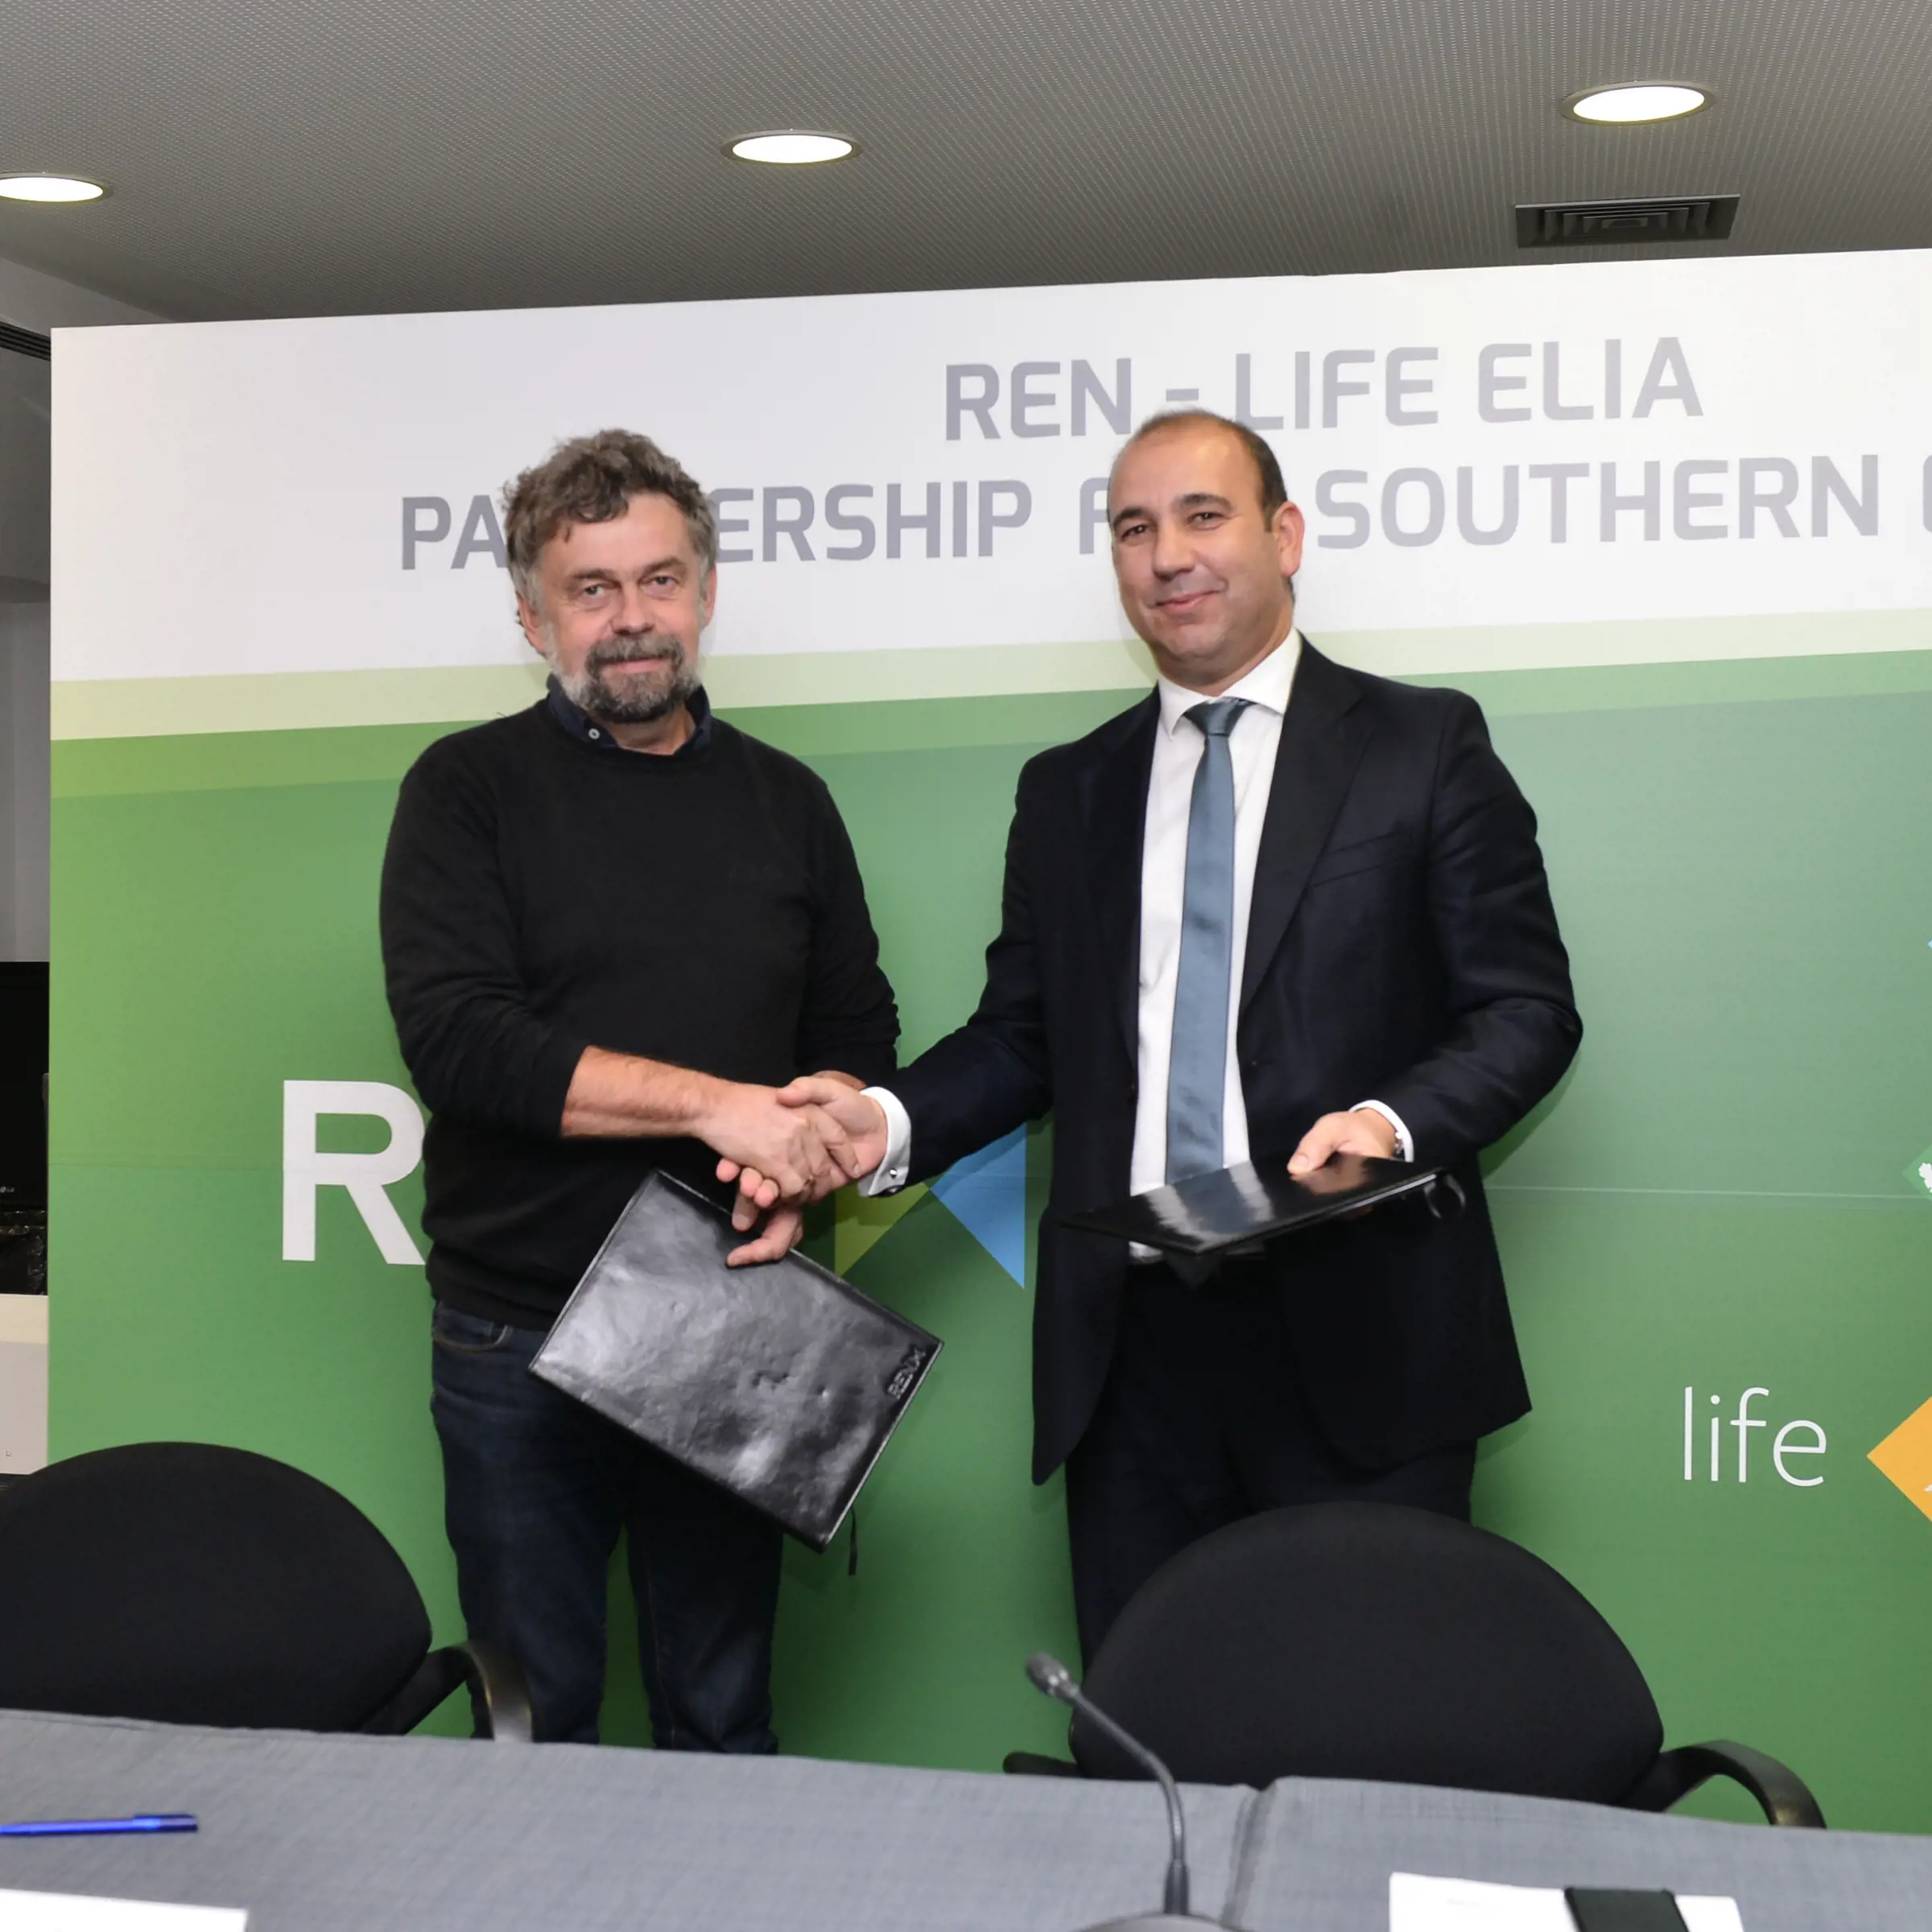 REN signs partnership agreement with LIFE Elia